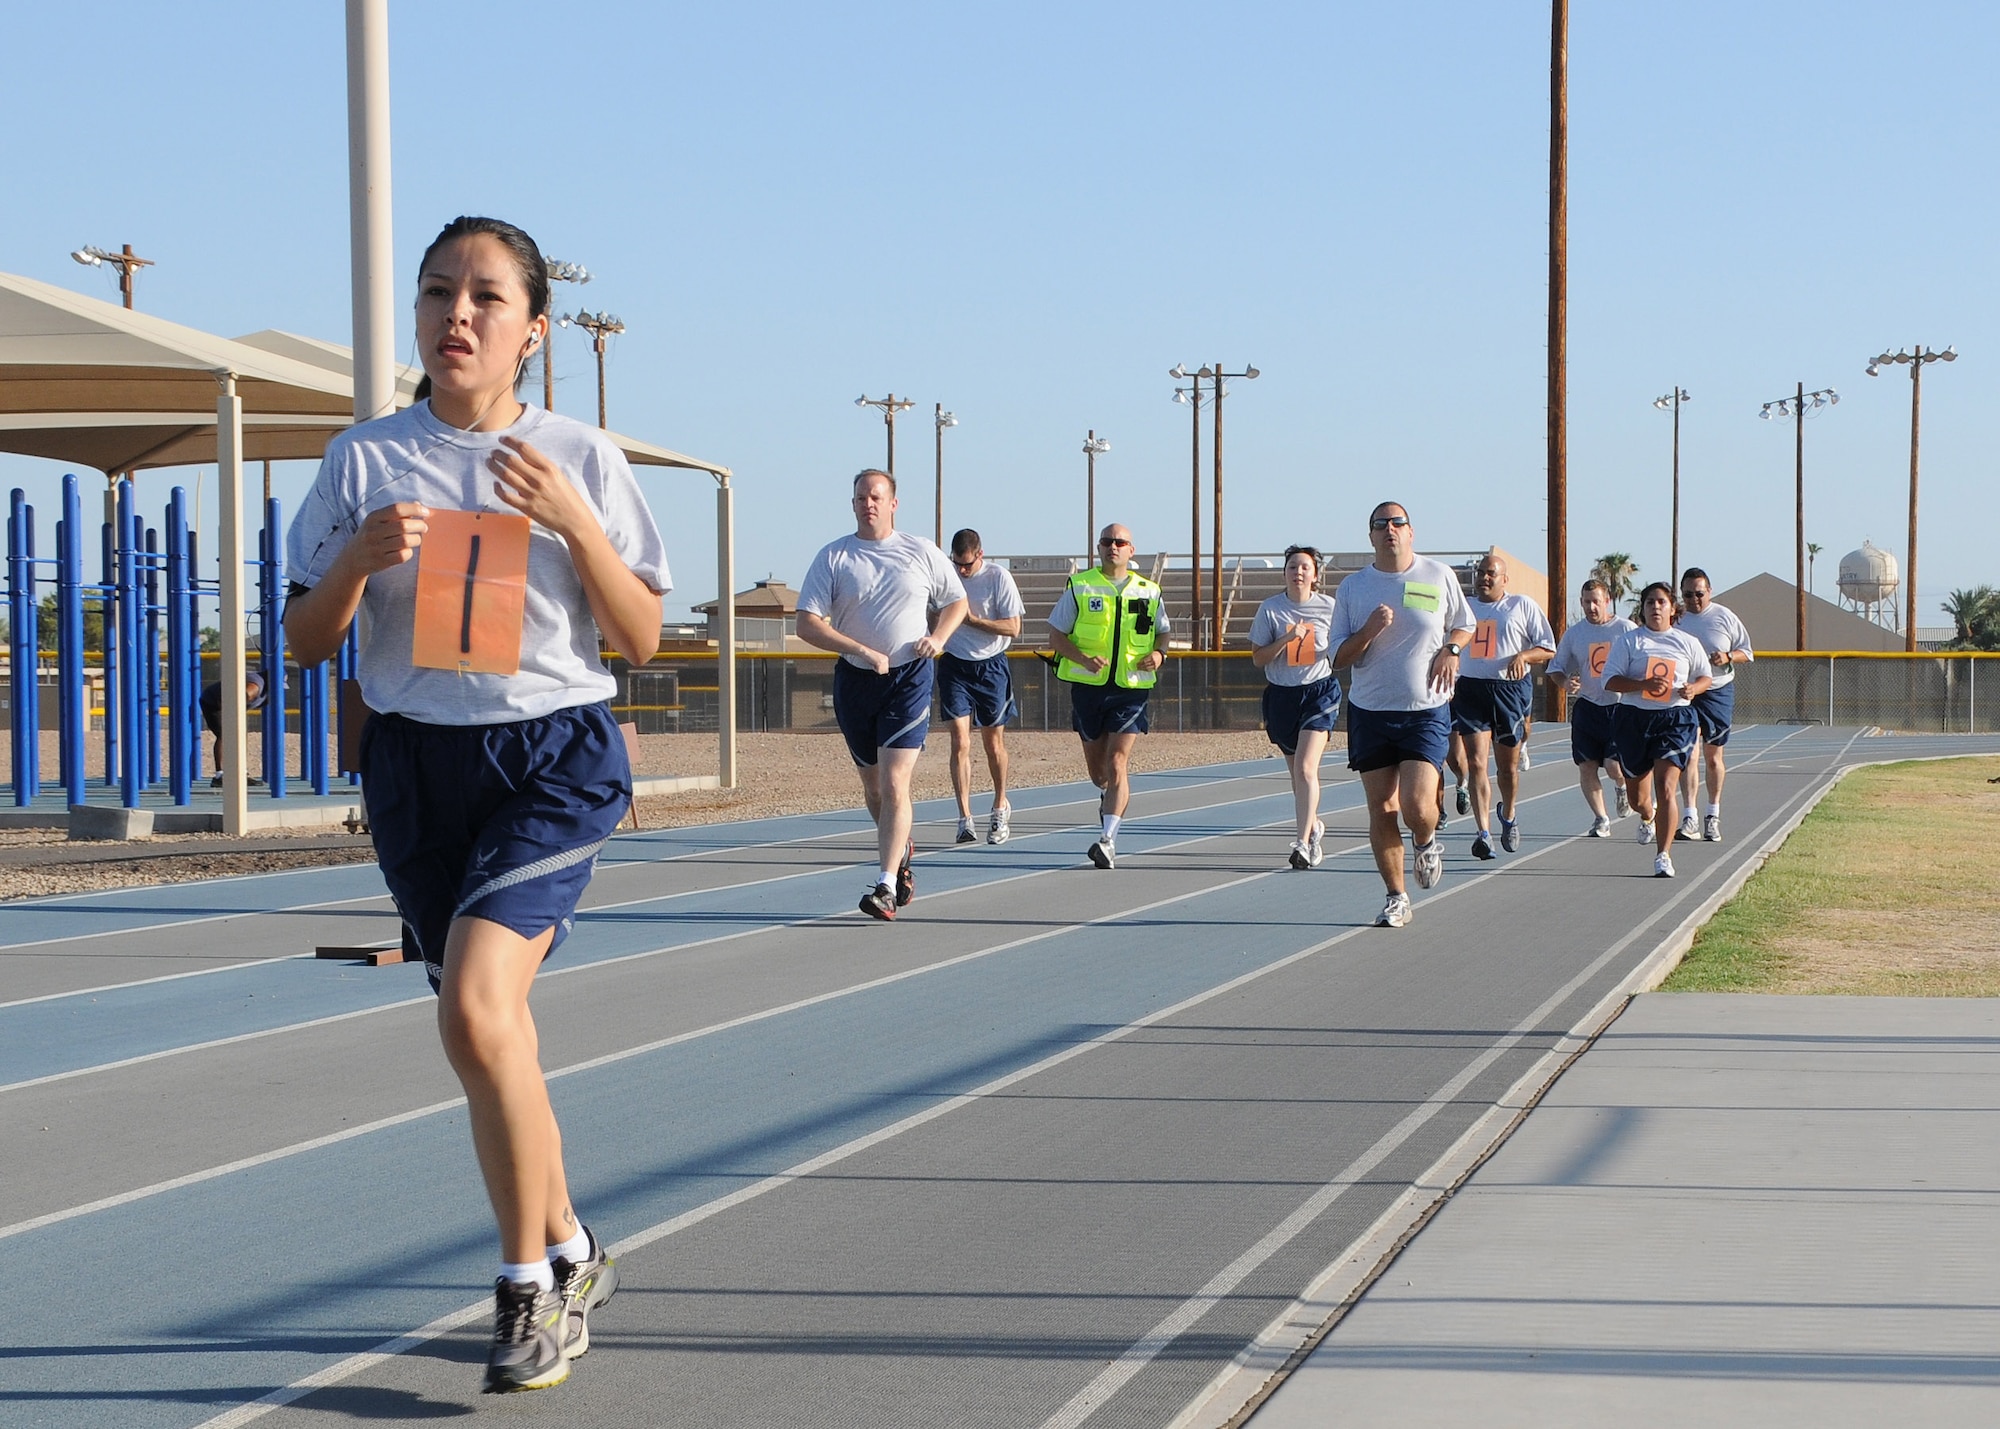 Airmen from the 944th Fighter Wing, perform the aerobic portion of their fitness assesment Aug. 7, 2011 at Luke Air Force Base, Ariz. (U.S. Air Force photo by Staff Sgt. Louis Vega Jr.)